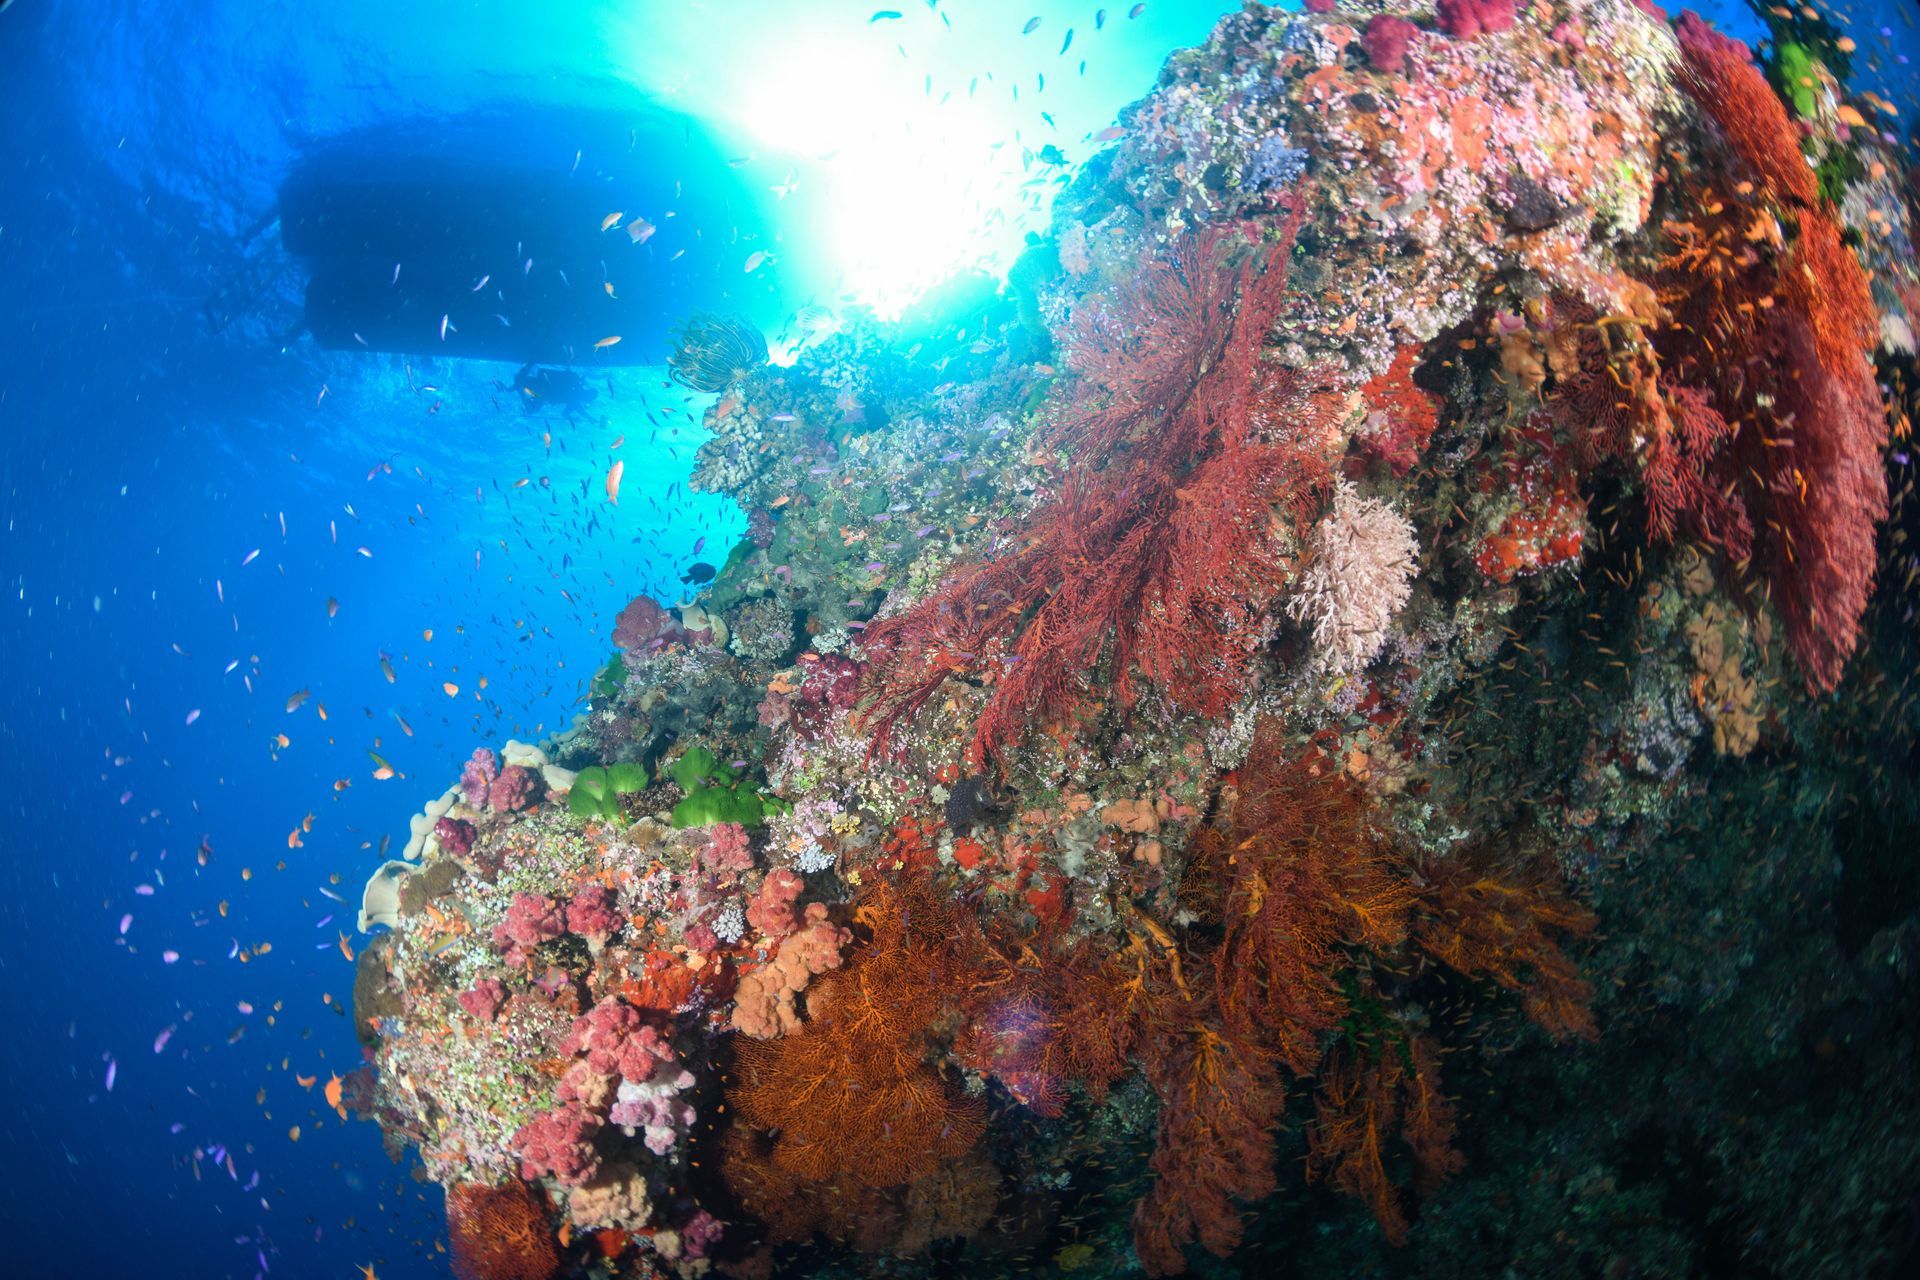 A boat and the sunlight in the scene of pink and red soft corals under the water in Fiji 